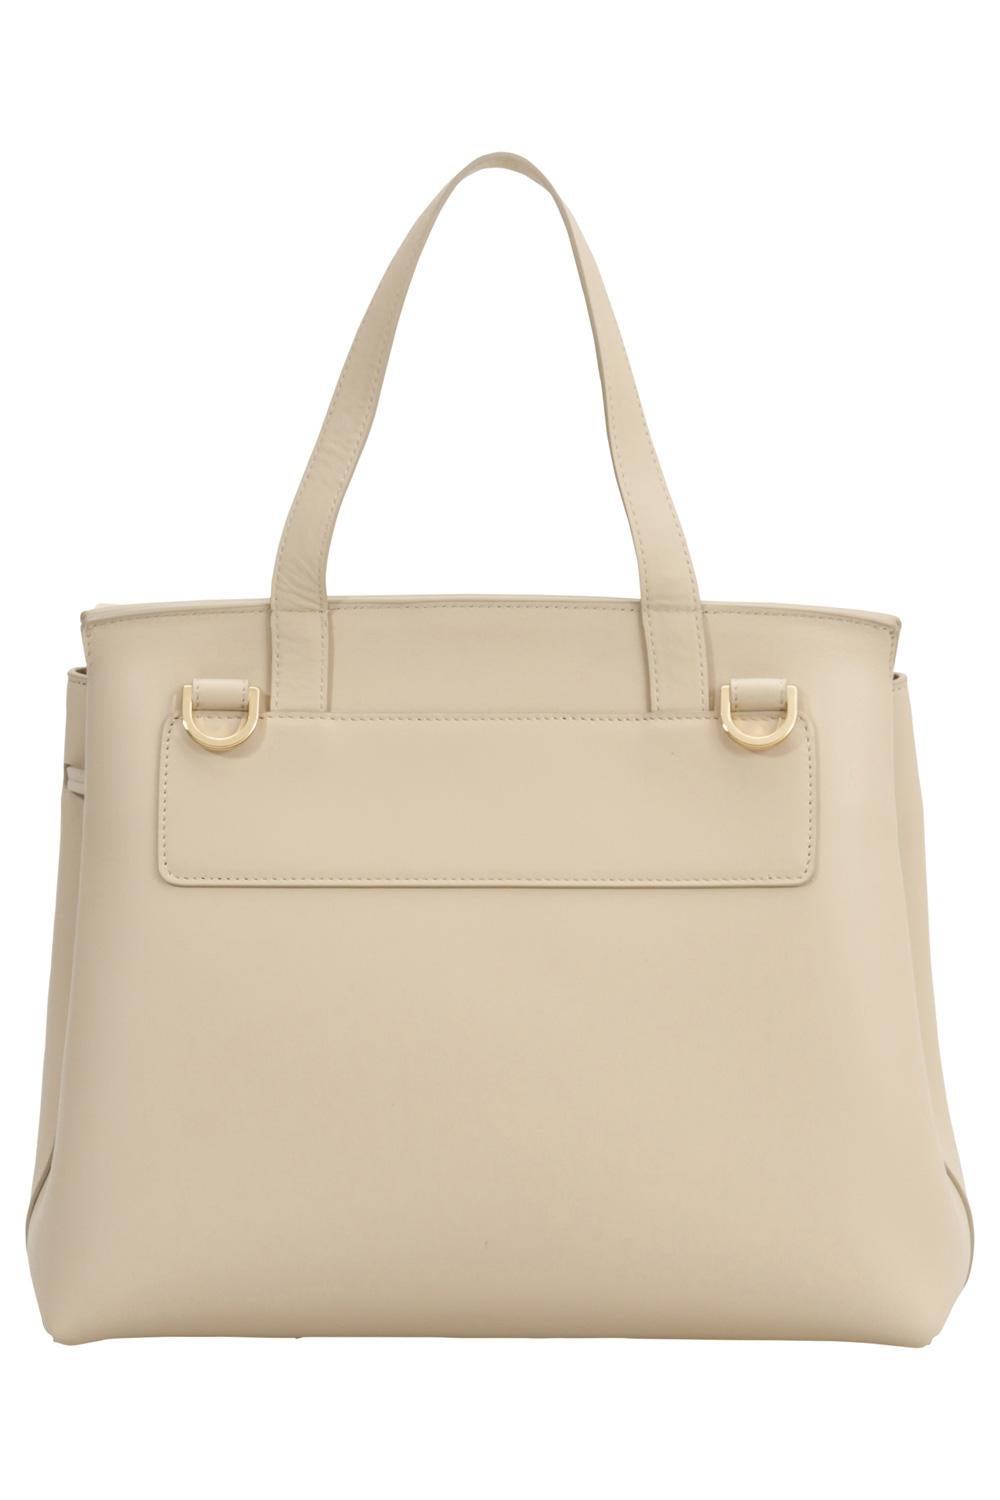 Subtle and sophisticated. this Lady tote from Mansur Gavriel is perfect for women with an understated fashion taste. It is crafted from leather and features a front flap and a drawstring closure. The bag boasts of a roomy canvas-lined interior that